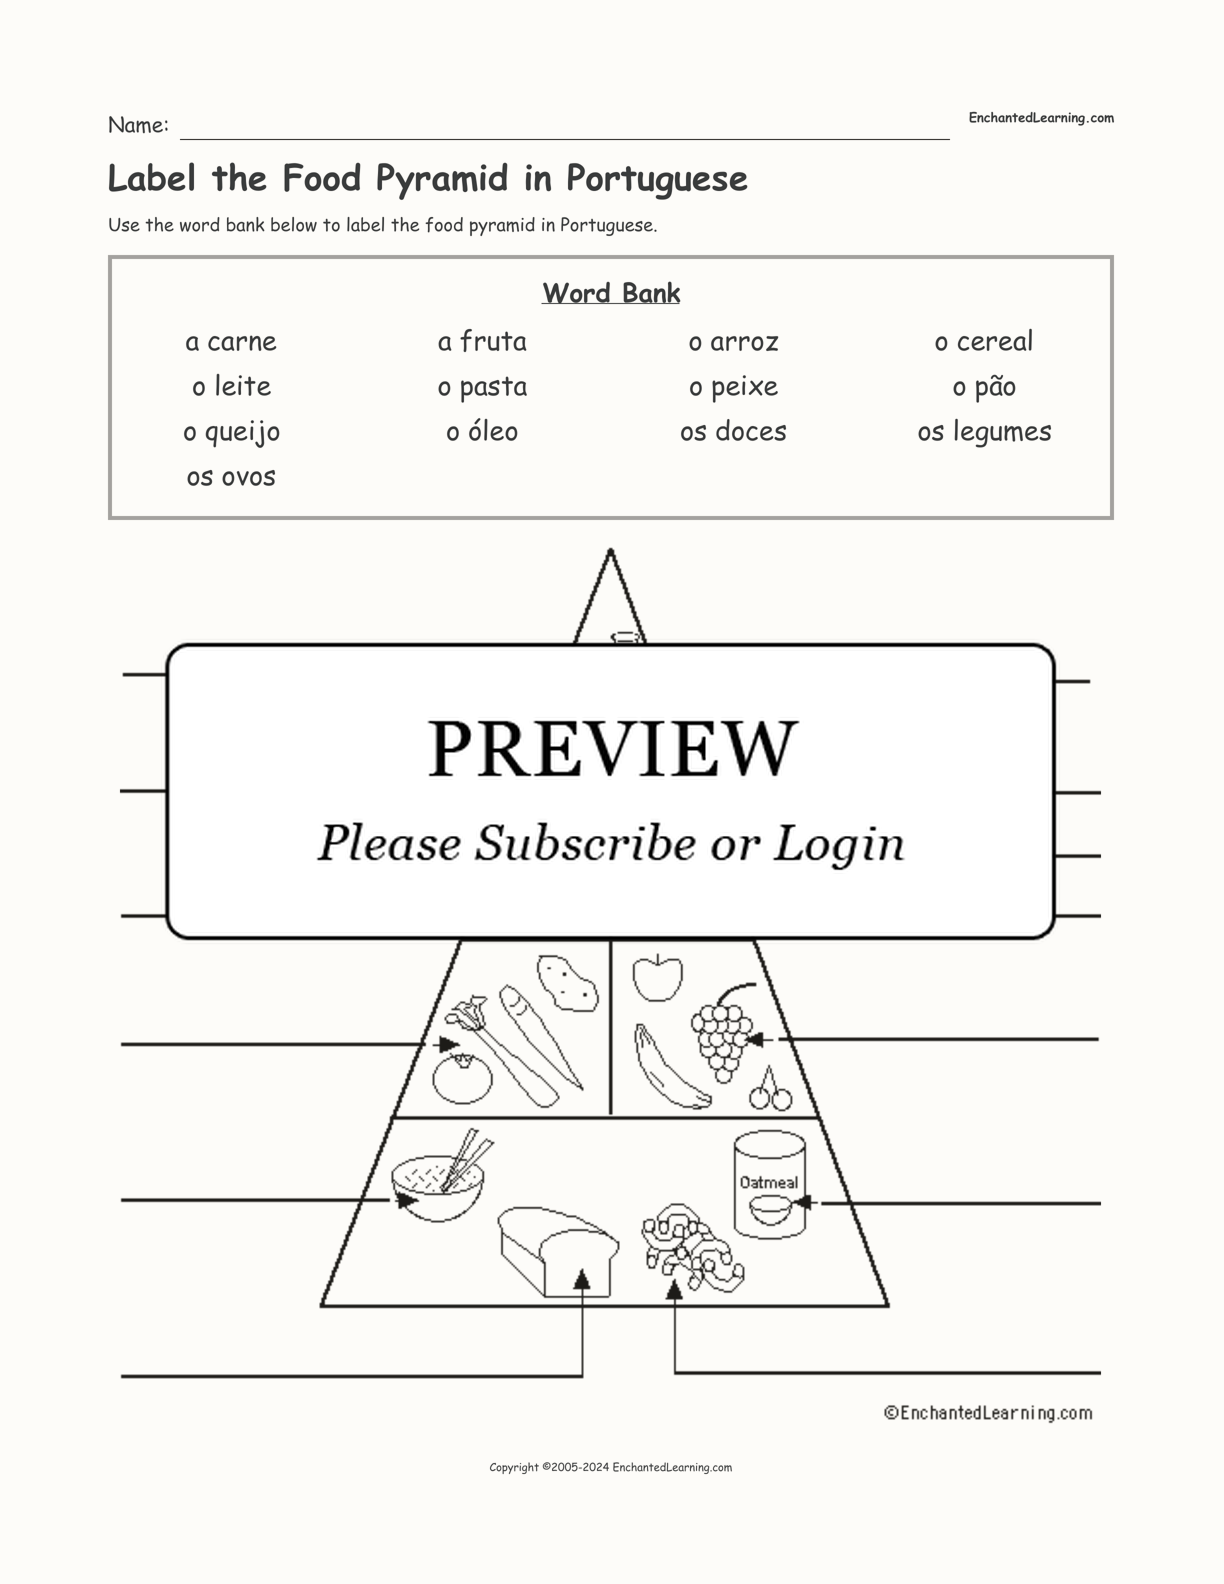 Label the Food Pyramid in Portuguese interactive worksheet page 1